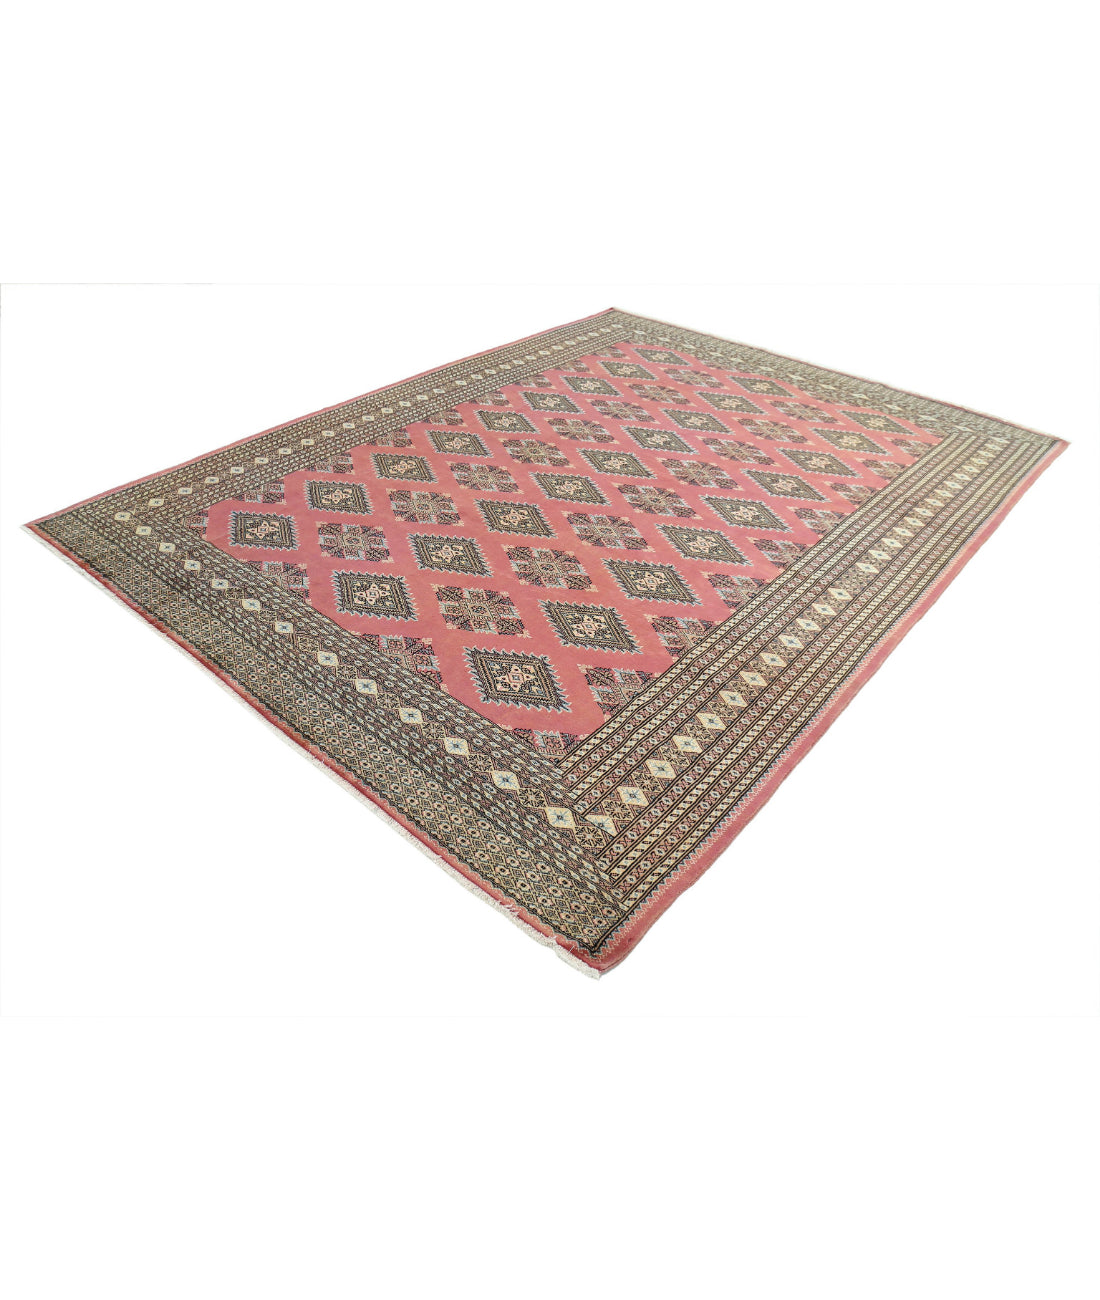 Hand Knotted Tribal Bokhara Wool Rug - 8'1'' x 10'4'' 8'1'' x 10'4'' (243 X 310) / Pink / Ivory